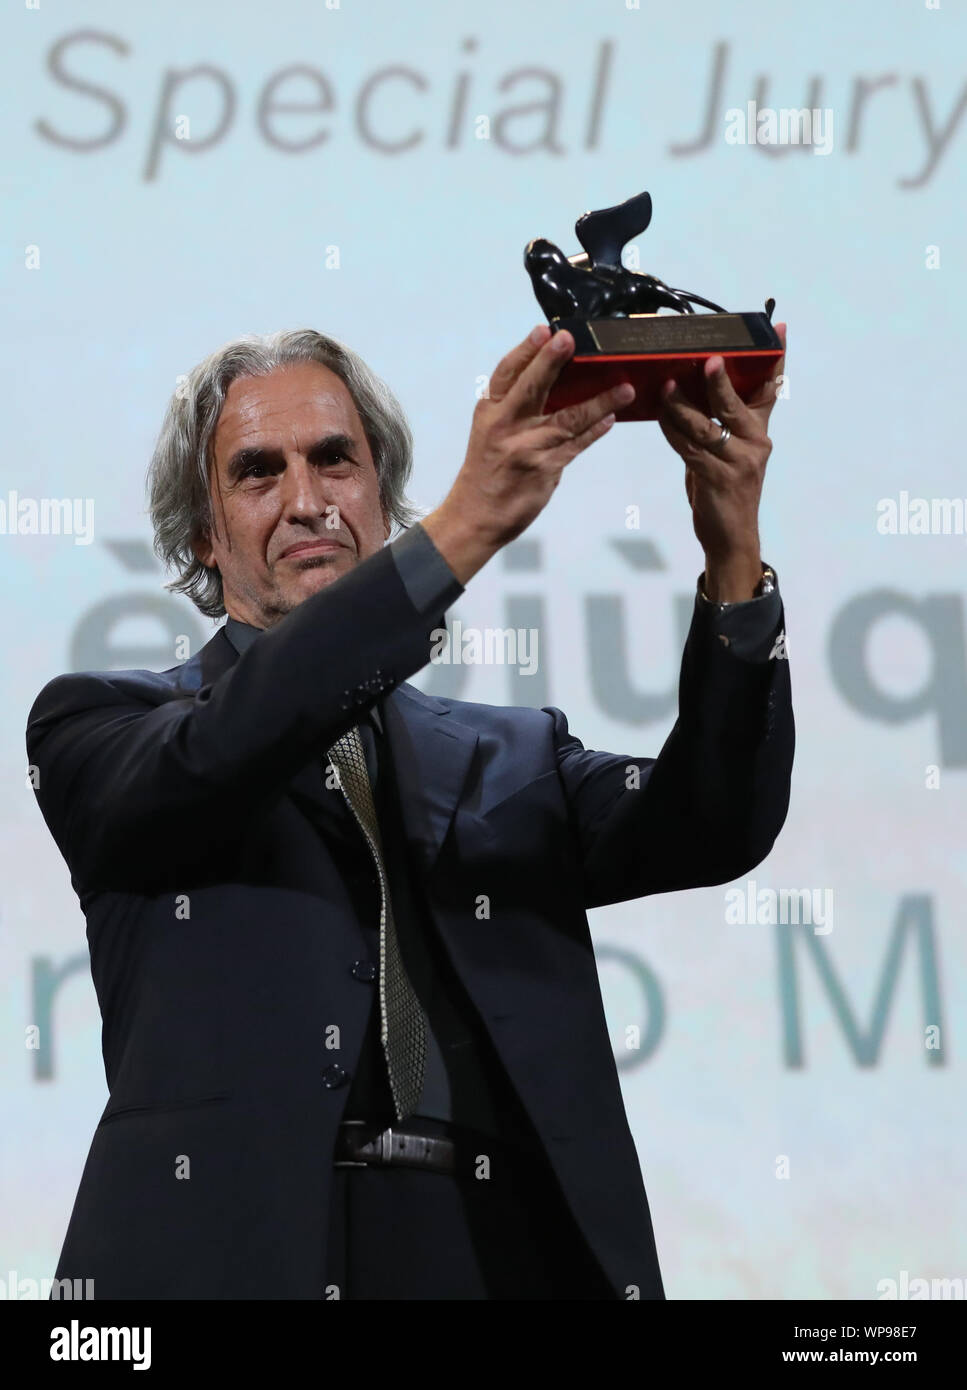 Venice, Italy. 7th Sep, 2019. Director Franco Maresco reacts after winning the Special Jury Prize at the 76th Venice International Film Festival, for his movie 'Mafia is not what it used to be', in Venice, Italy, Sept. 7, 2019. The 76th Venice Film Festival has run from Aug. 28 to Sept. 7 at the Lido of the Italian lagoon city, with 21 films in competition. Credit: Cheng Tingting/Xinhua/Alamy Live News Stock Photo